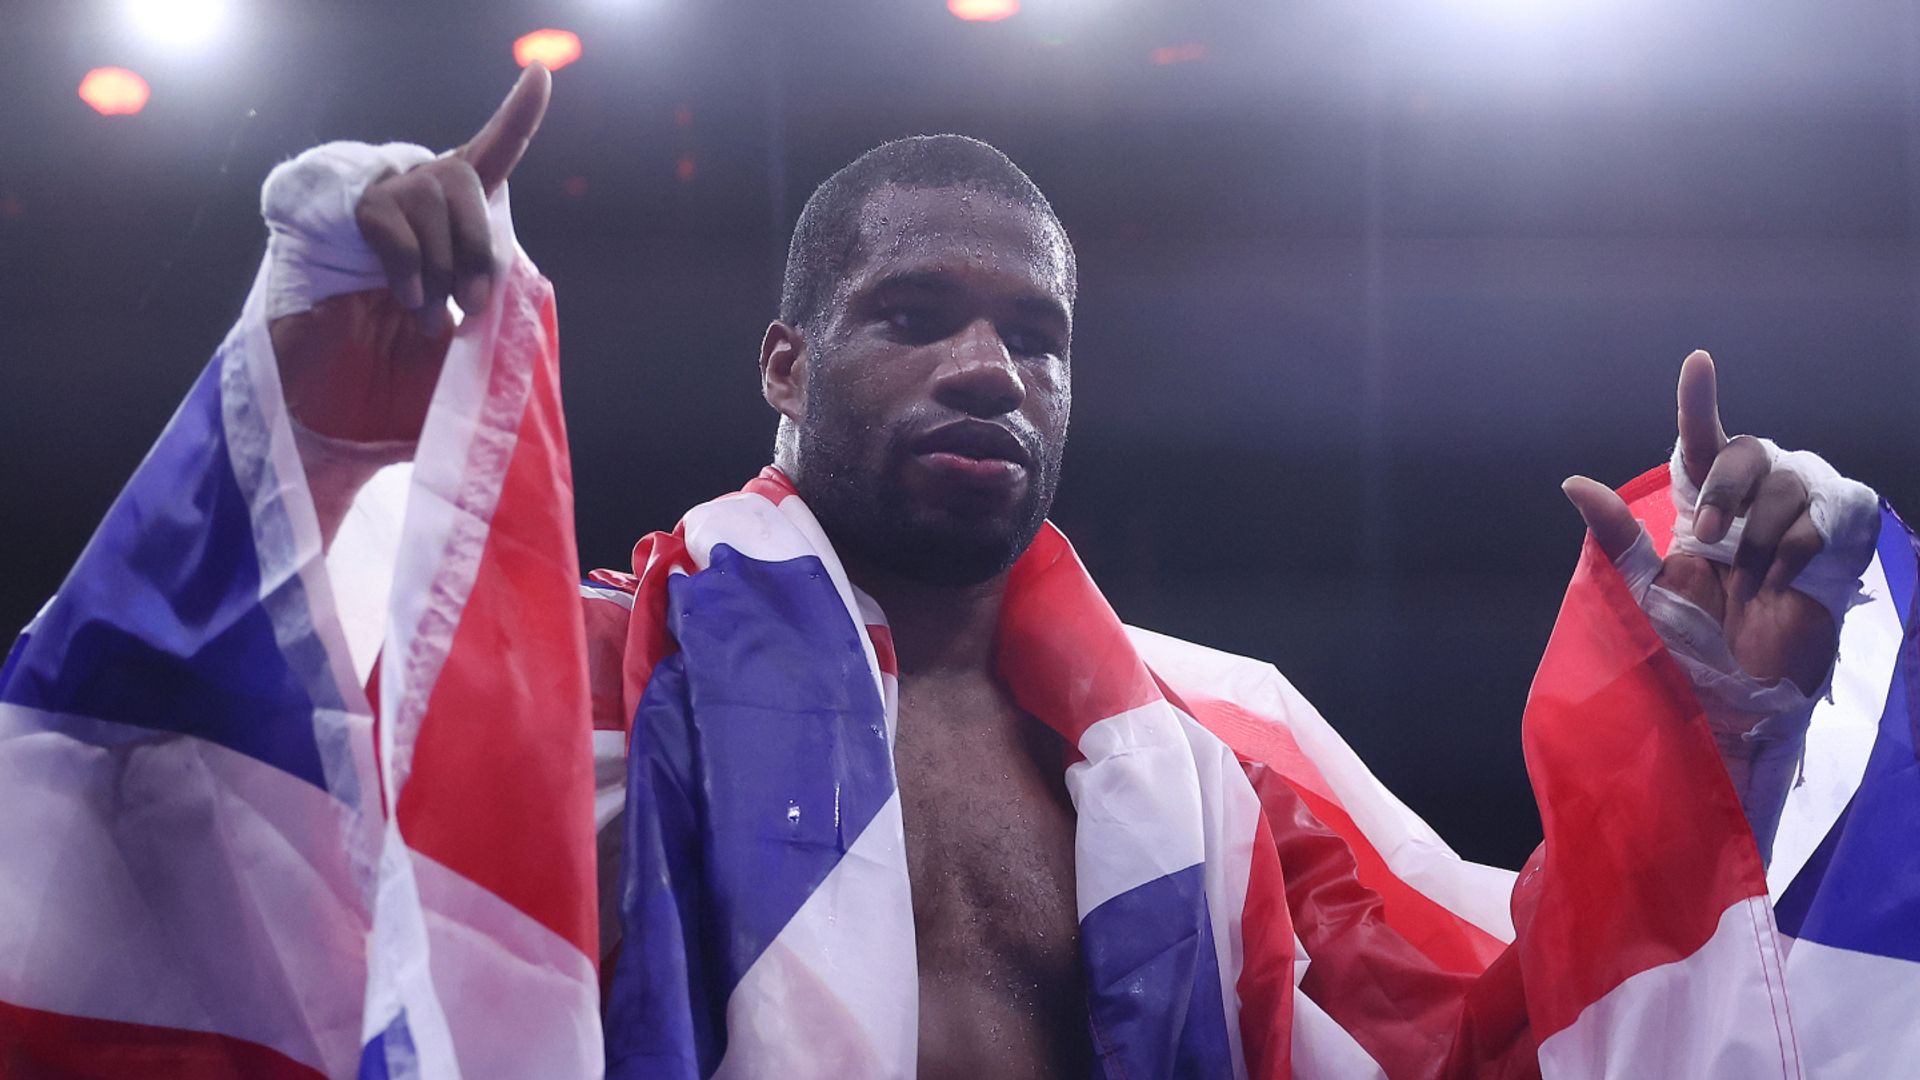 Dubois defeats Miller in dramatic late stoppage